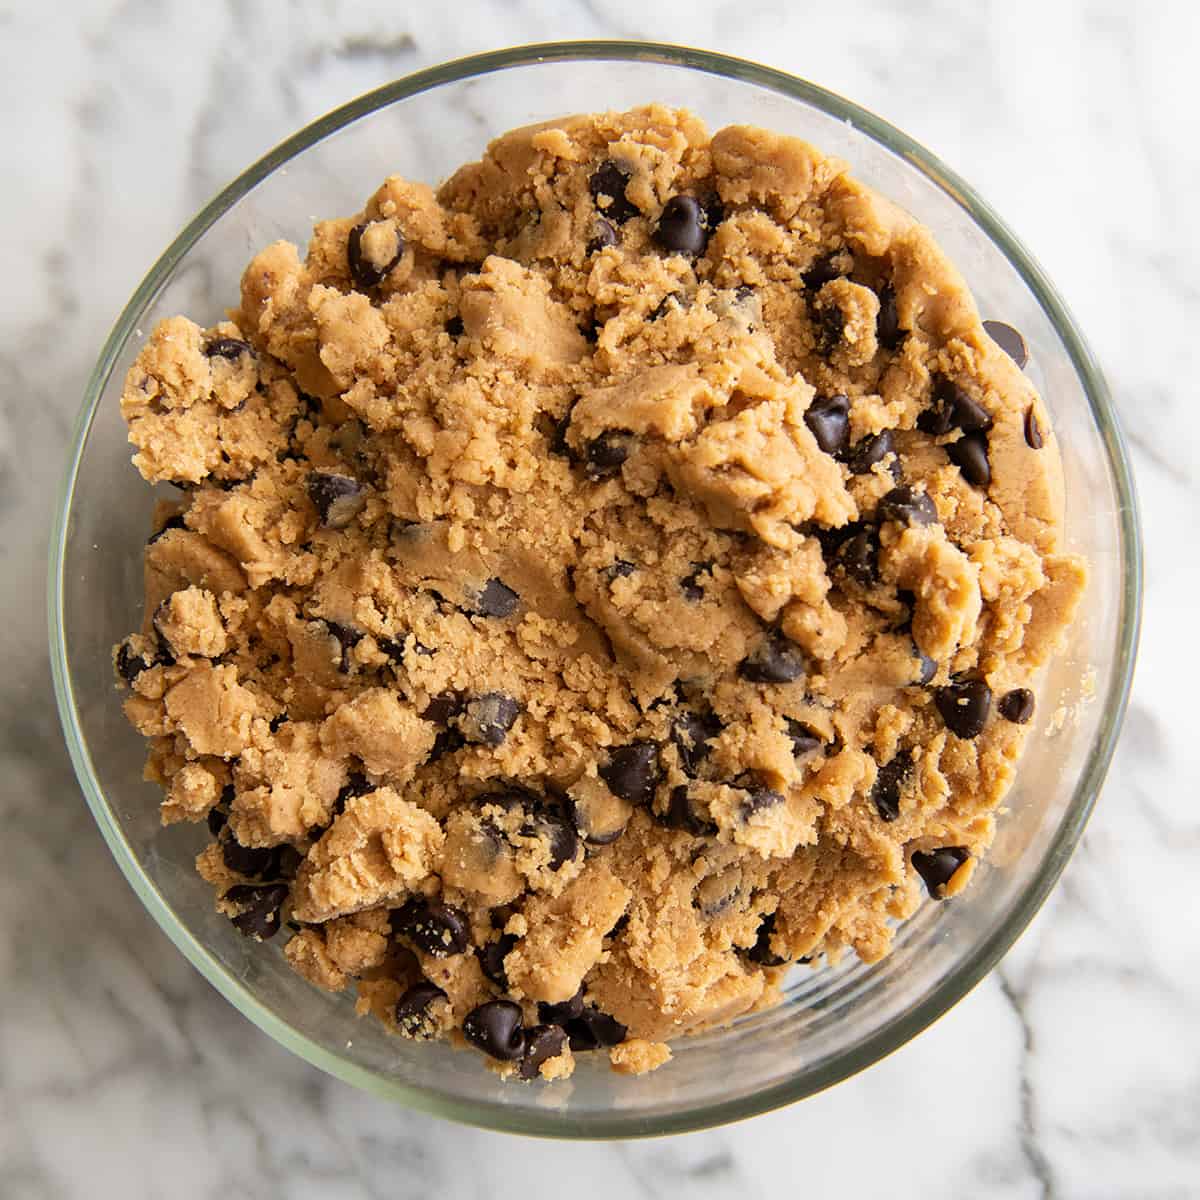 Peanut Butter Chocolate Chip Cookie dough in a glass container to chill